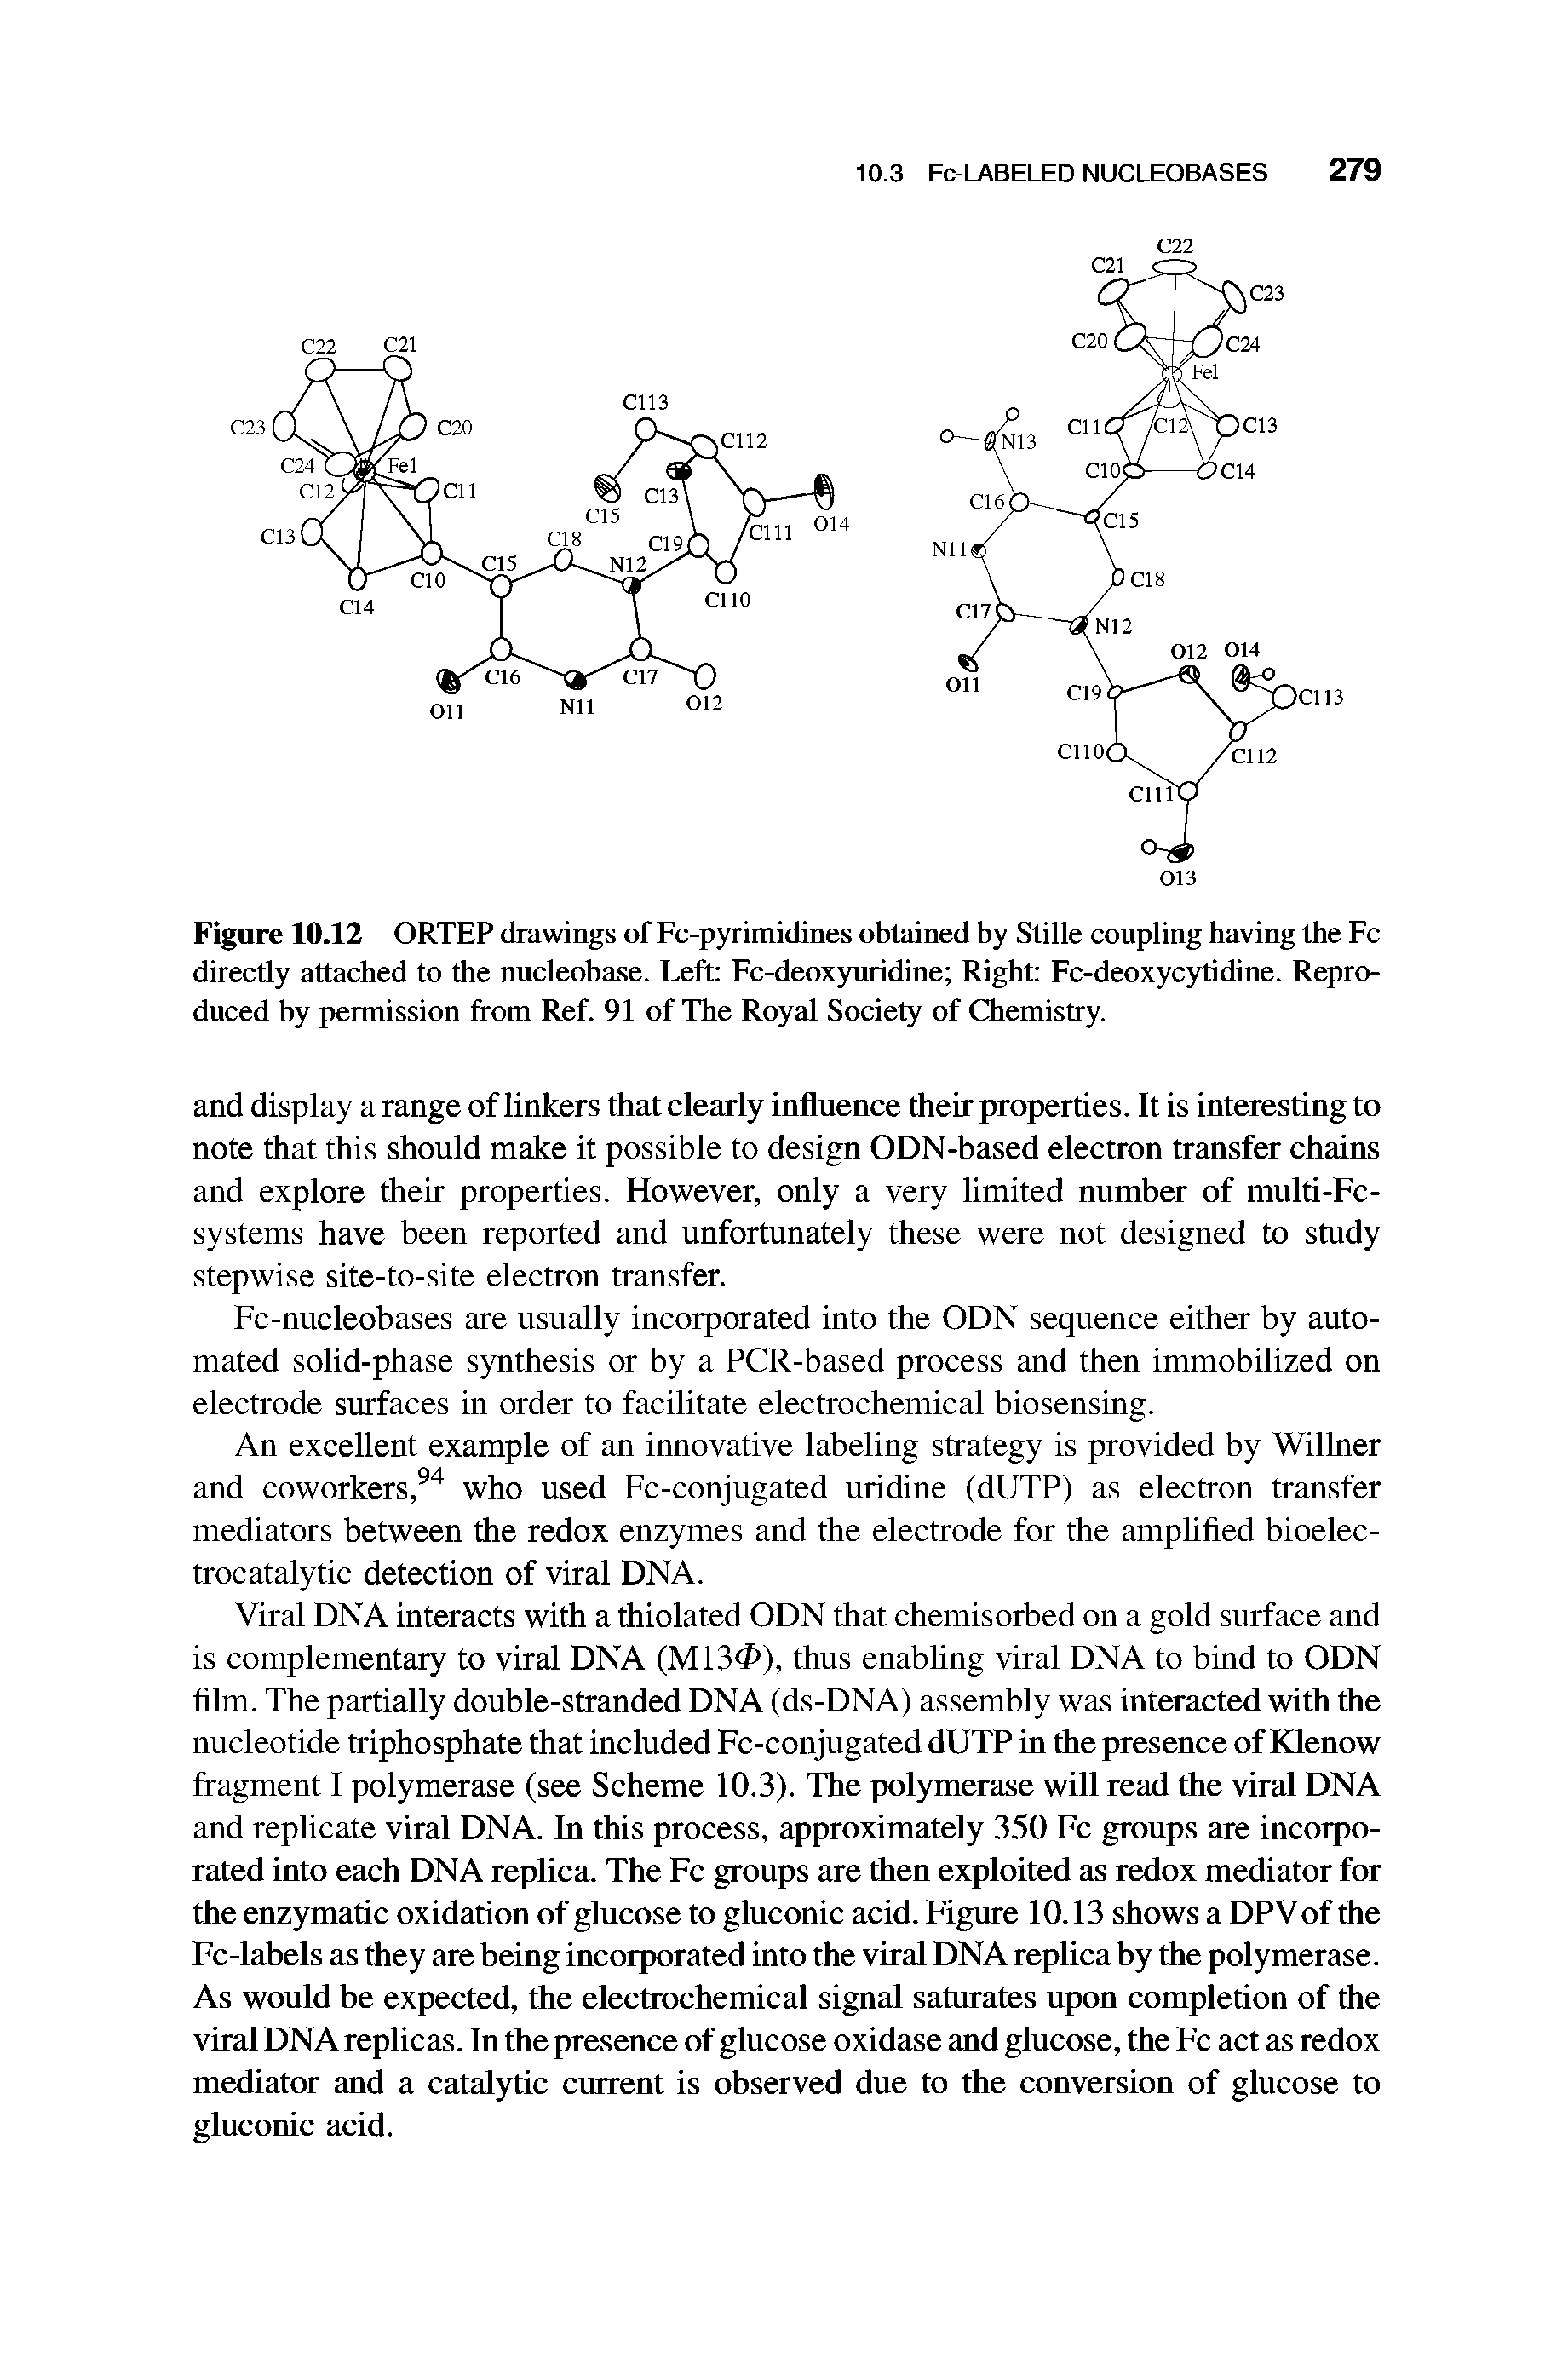 Figure 10.12 ORTEP drawings of Fc-pyrimidines obtained by Stille coupling having the Fc directly attached to the nucleobase. Left Fc-deoxyuridine Right Fc-deoxycytidi ne. Reproduced by permission from Ref. 91 of The Royal Society of Chemistry.